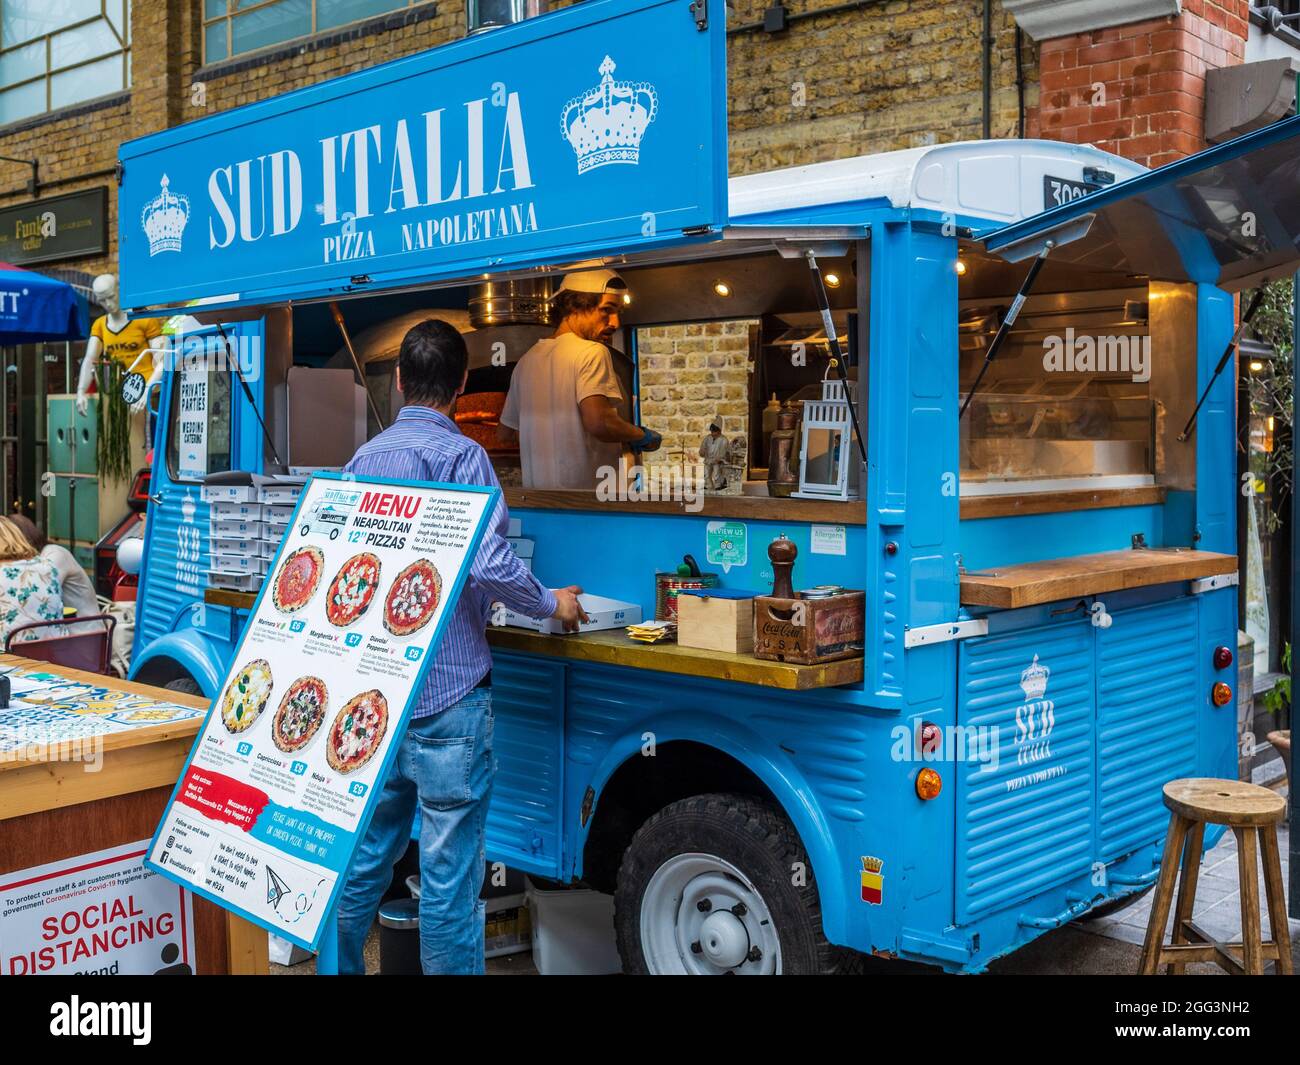 London Street Food Pizza - A mobile Pizza van fires up the oven in London's Spitalfields market ready for the lunchtime rush. Stock Photo